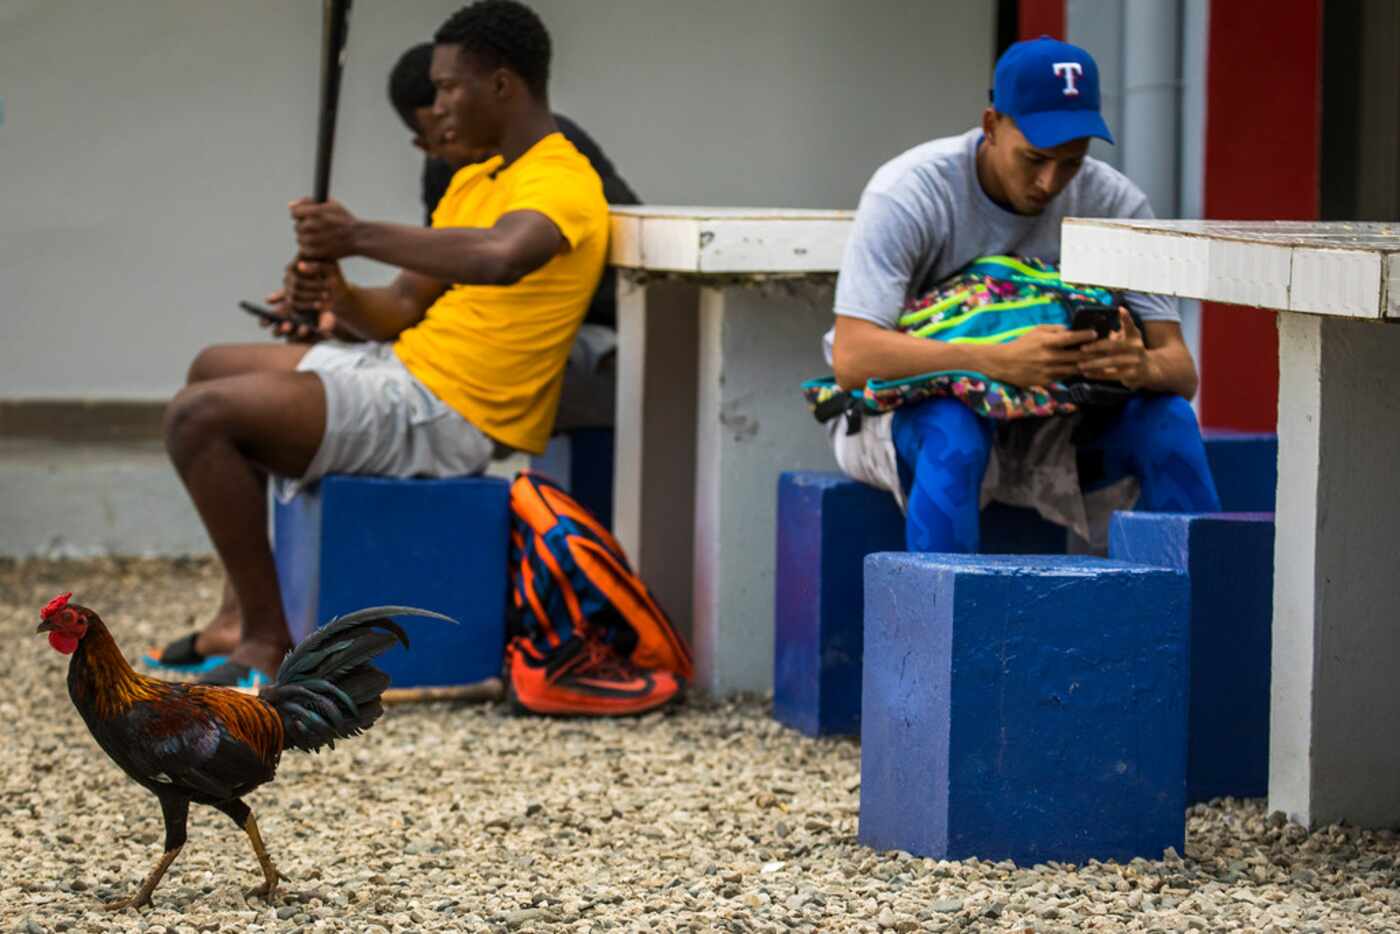 A chicken passes through the courtyard as players relax after a workout at the Texas Rangers...